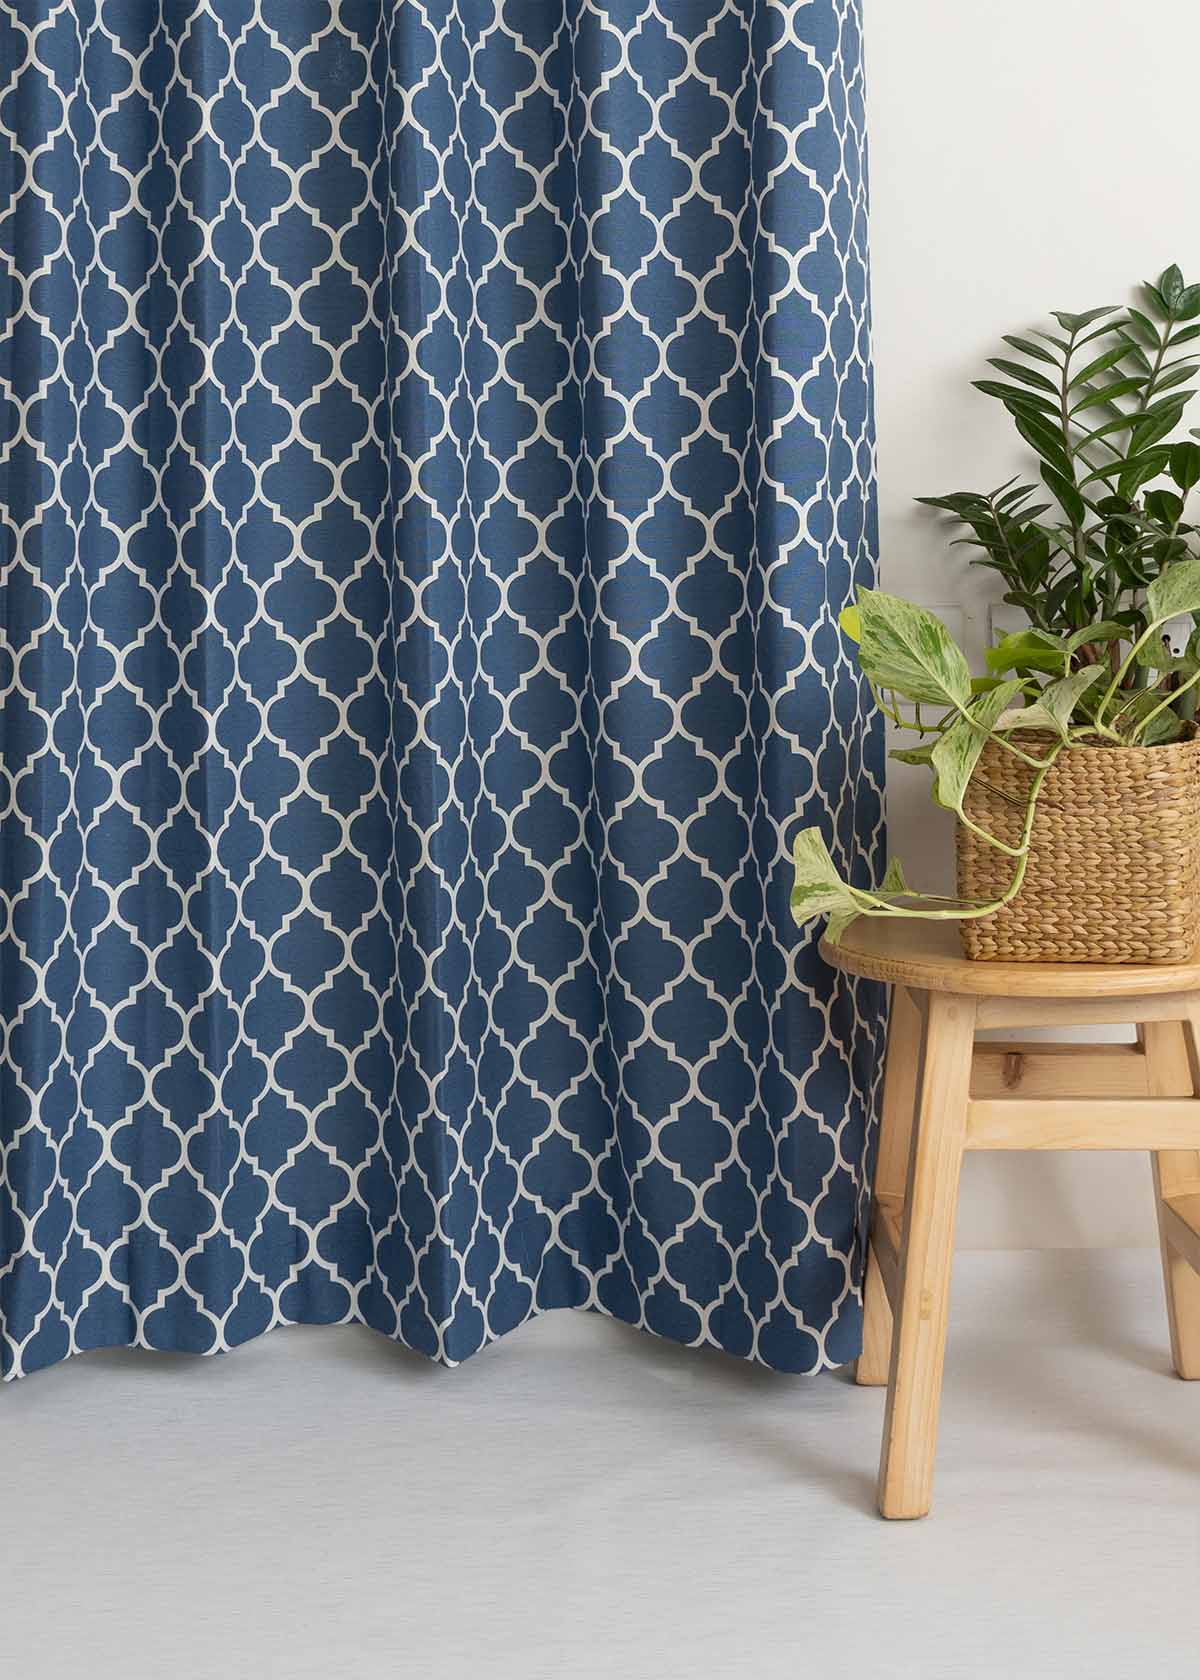 Reverse Trellis 100% cotton geometric curtain for bed room - Room darkening - Royal Blue - Pack of 1